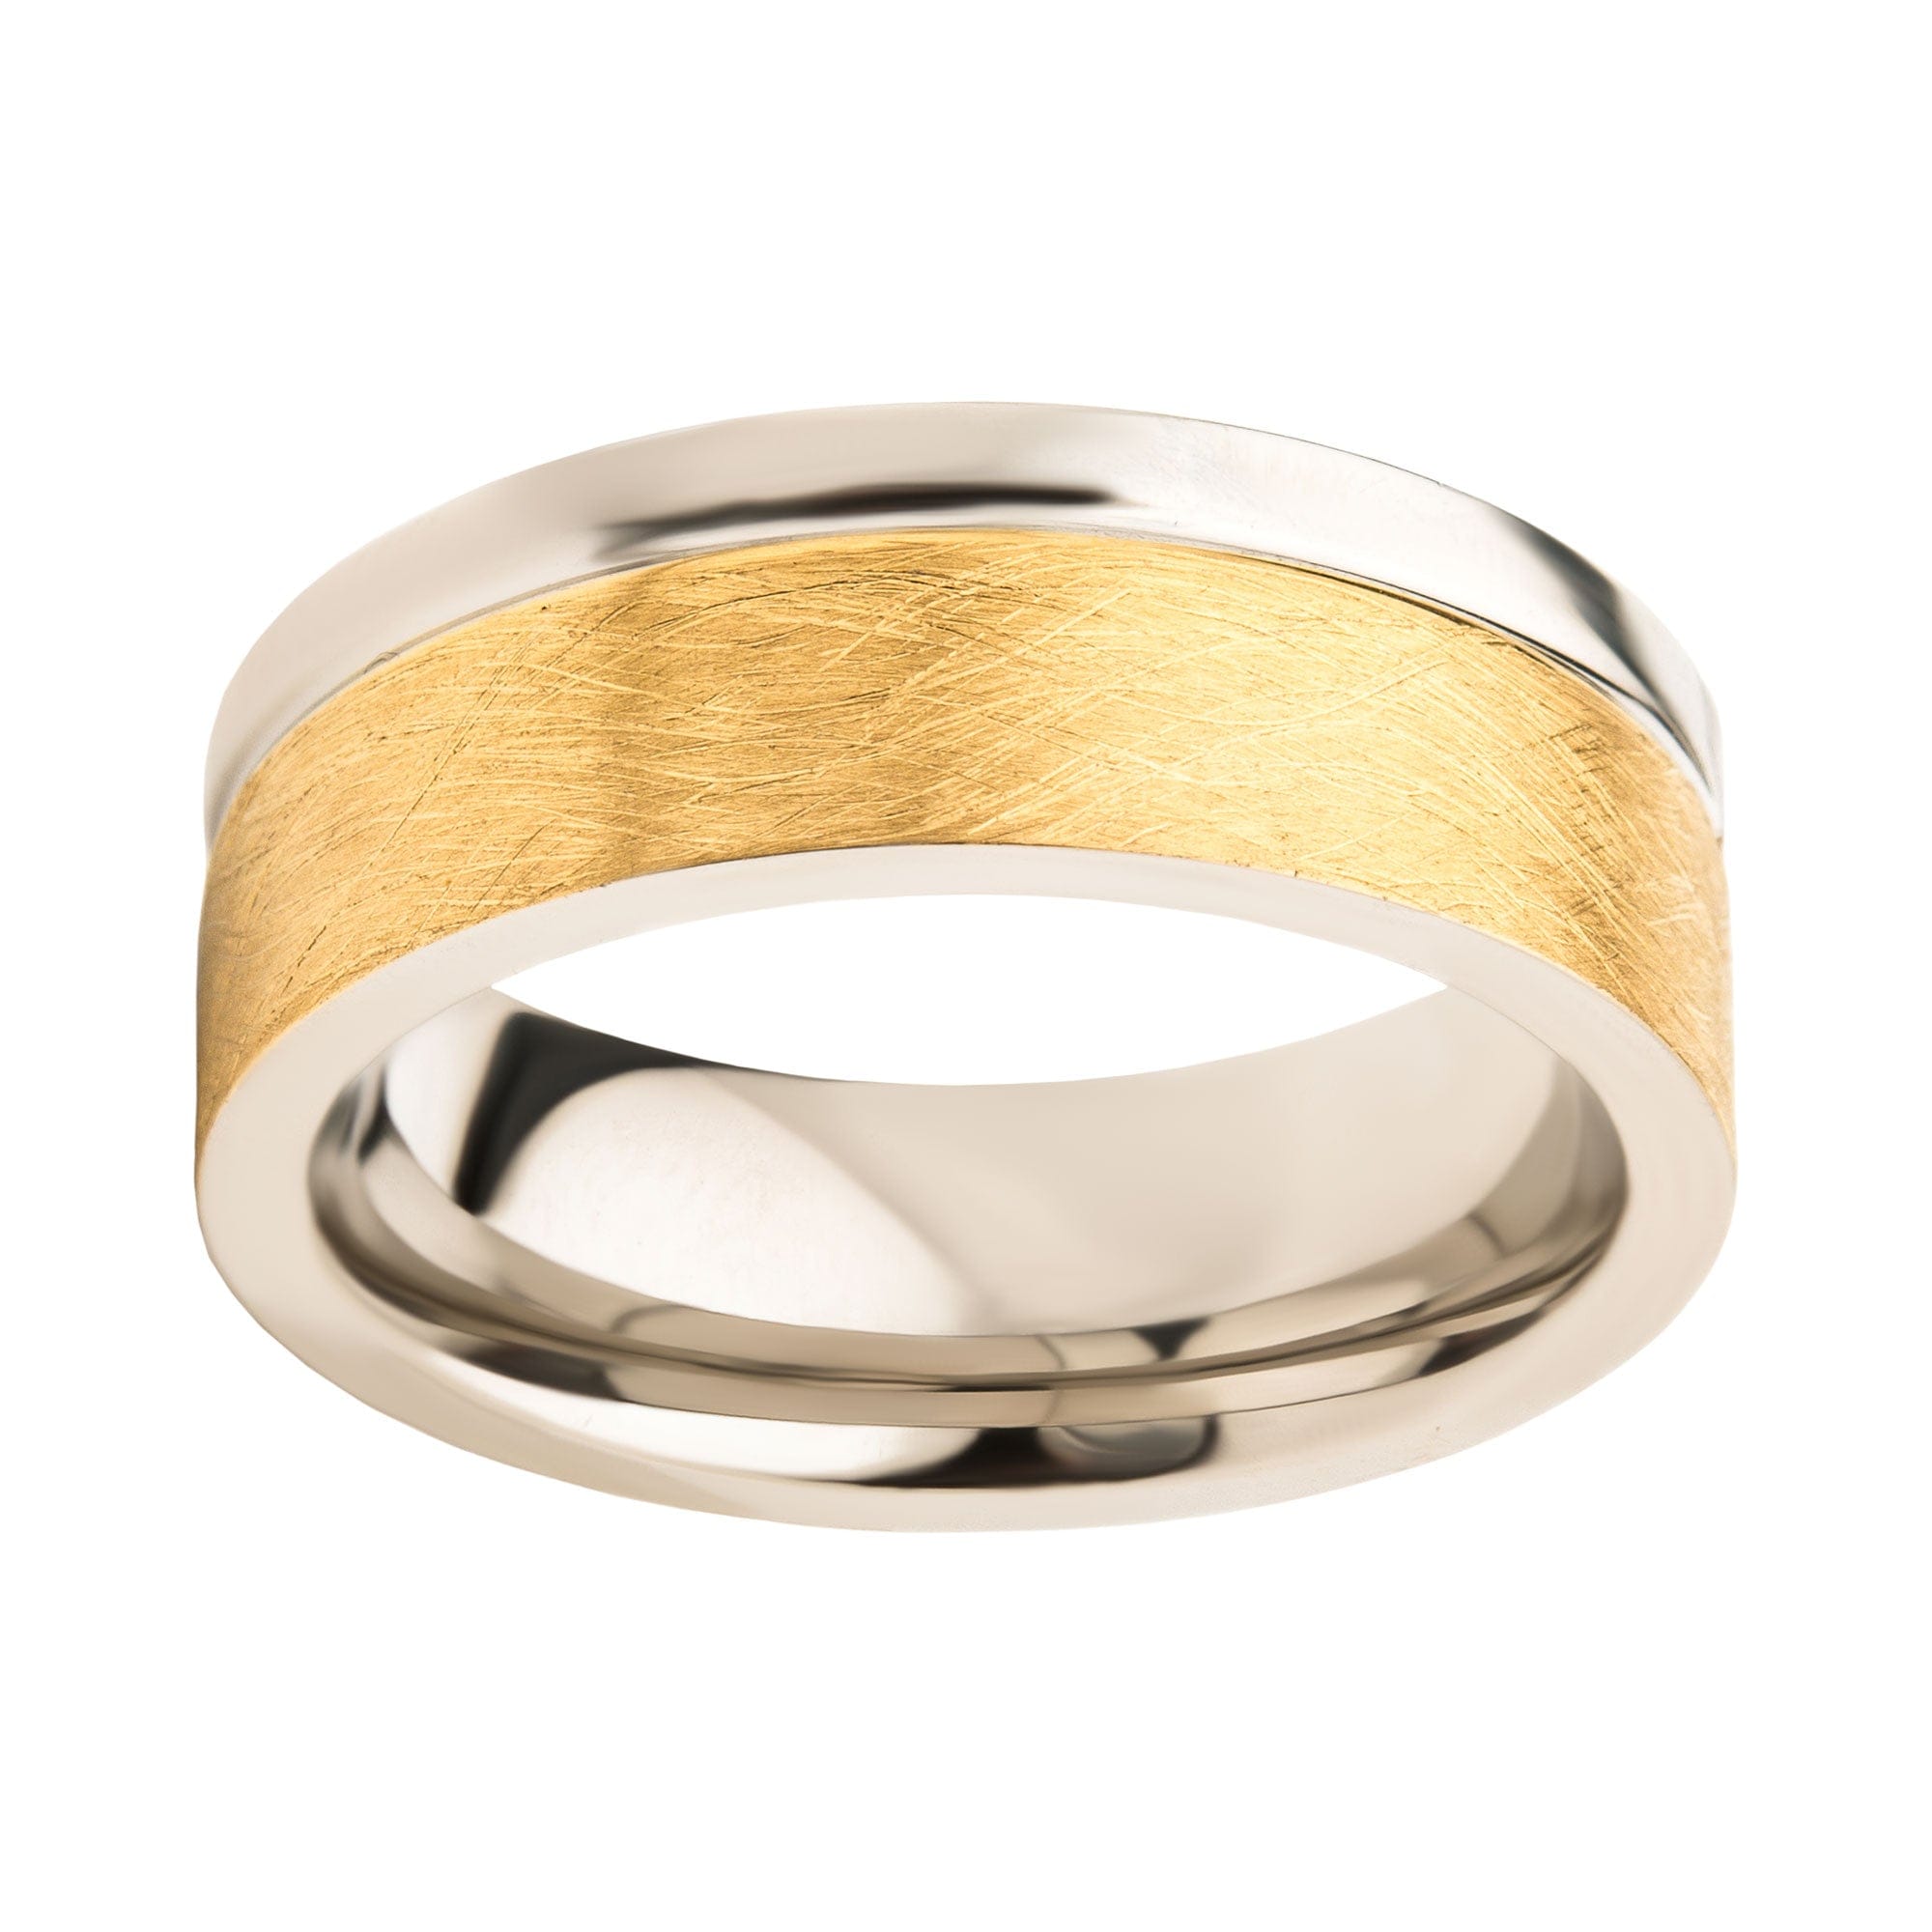 INOX JEWELRY Rings Golden Tone and Silver Tone Stainless Steel Brushed Finish Band Ring